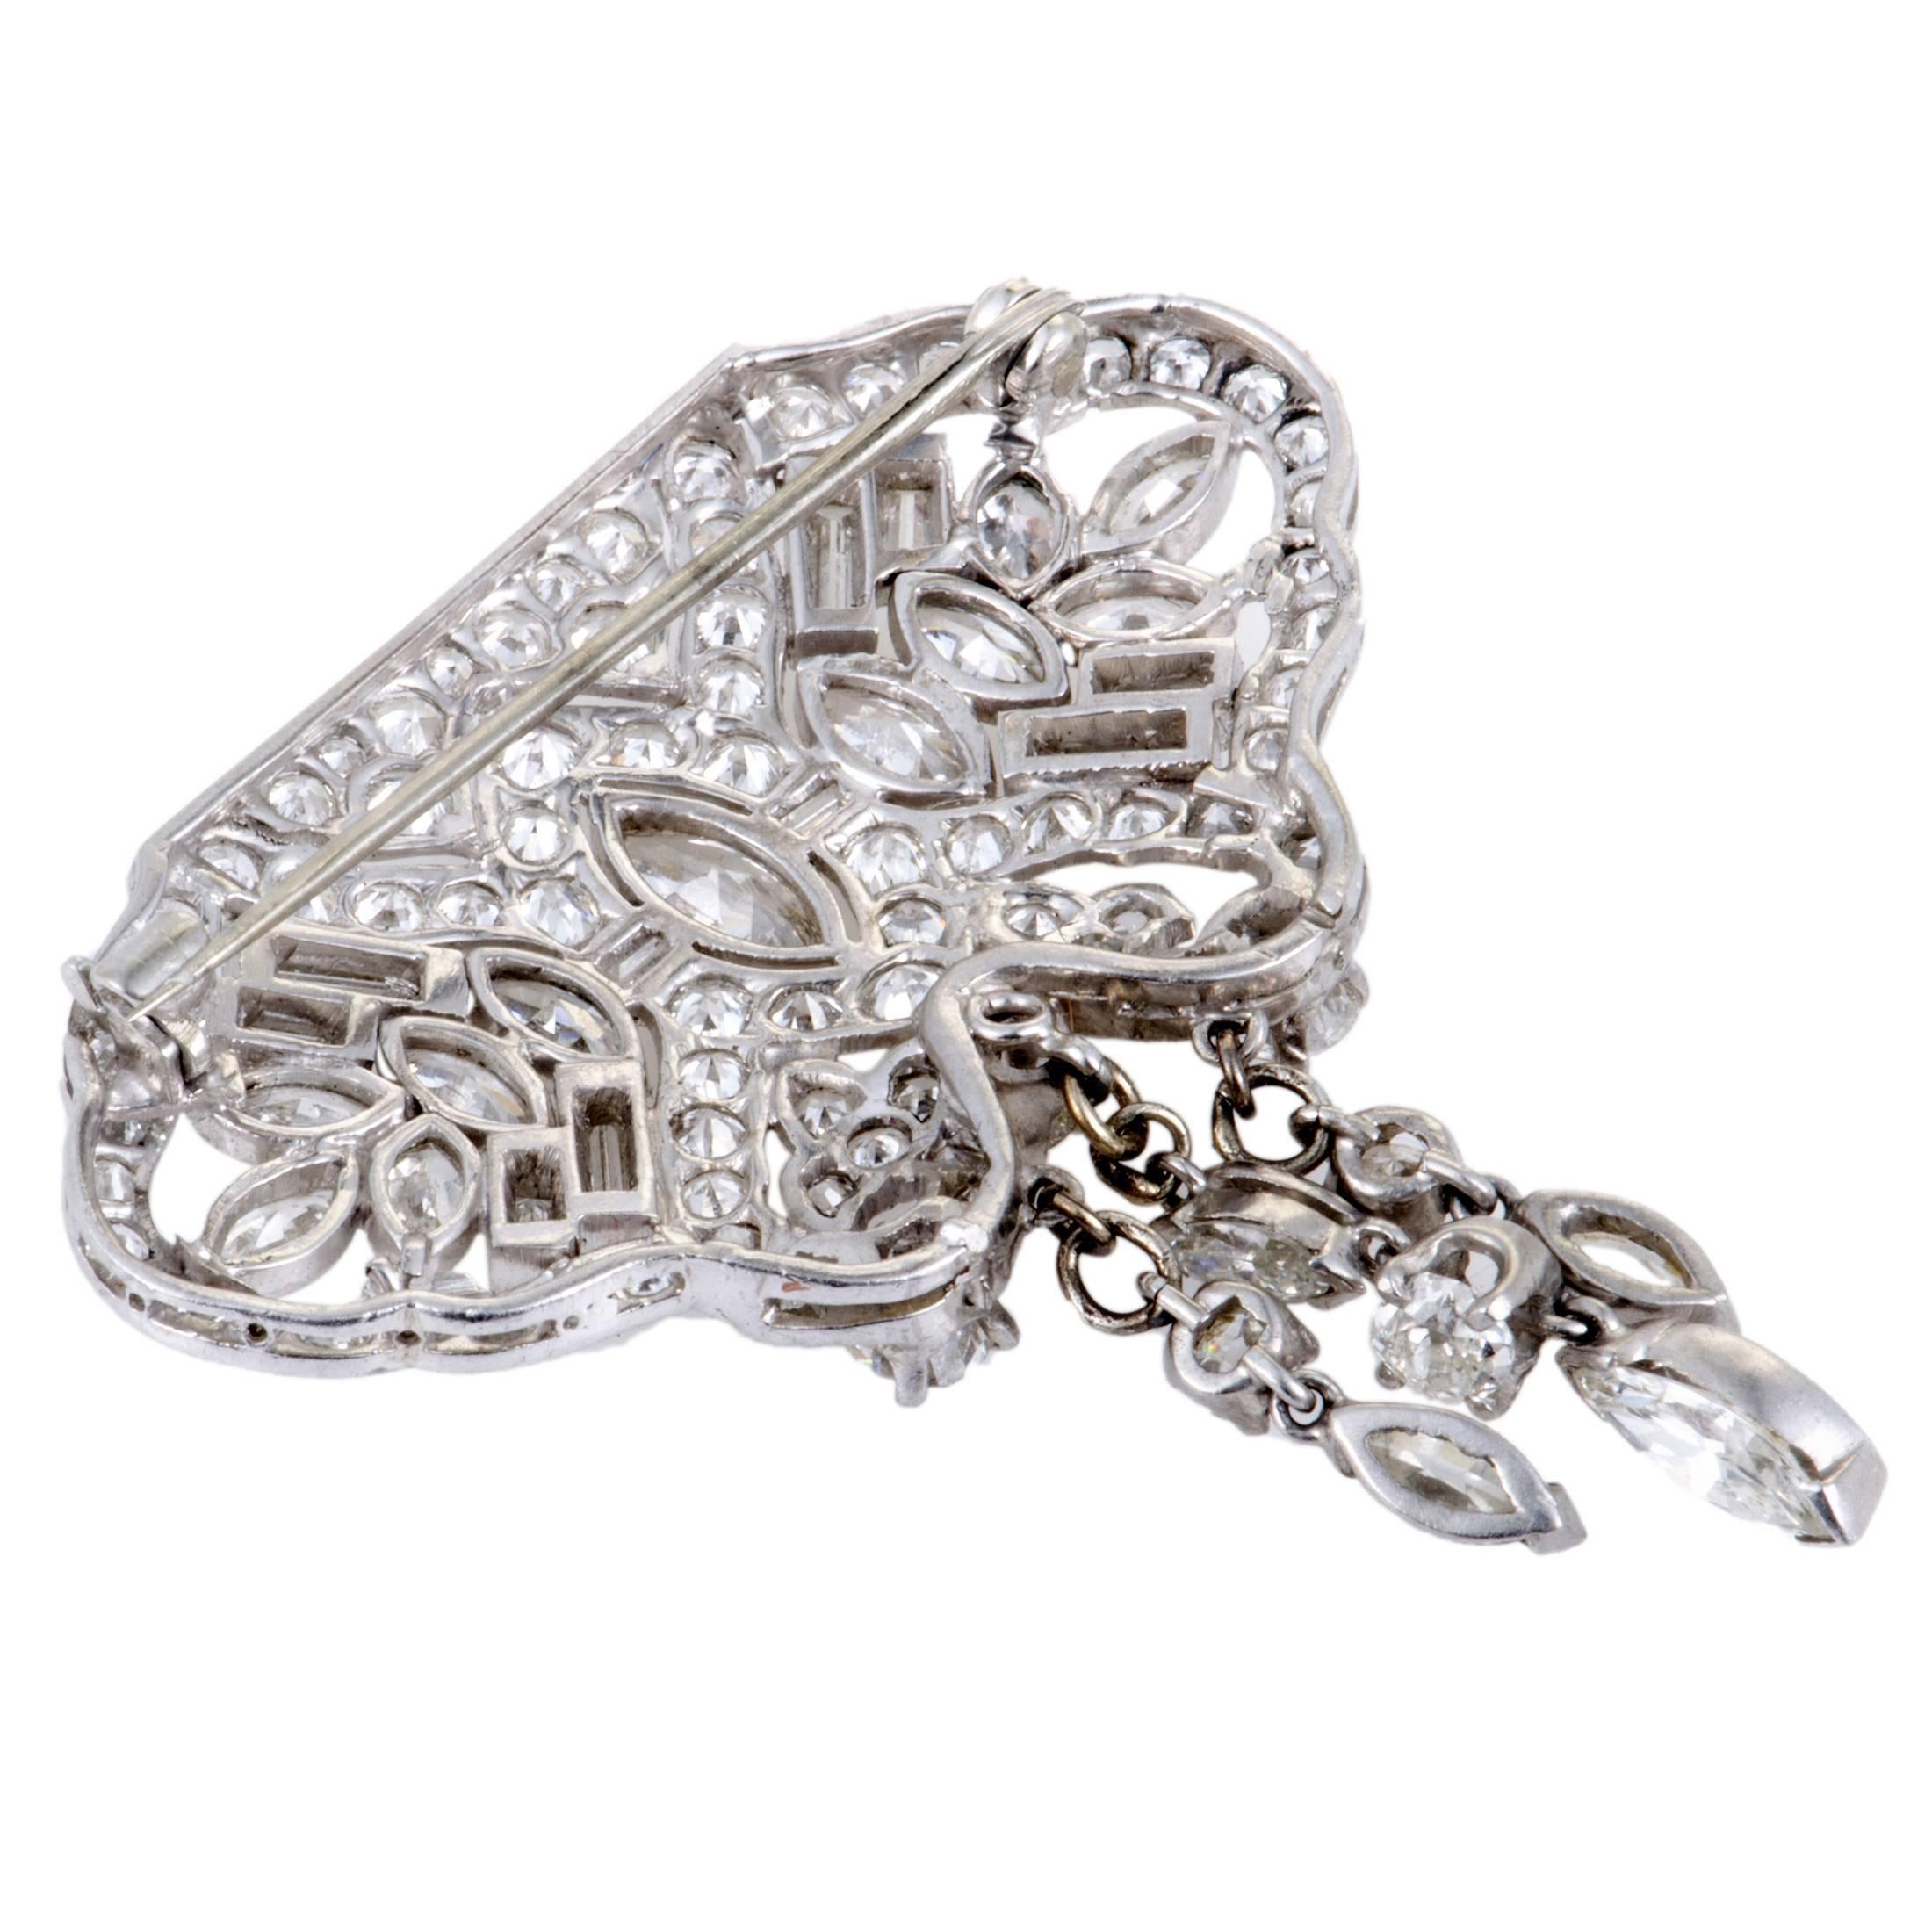 Designed in a compellingly classy manner, this stunning brooch is the epitome of extravagance and prestige. The brooch is expertly crafted from elegant platinum and it is set with glistening diamond stones that weigh 8.50 carats in total.
1.75